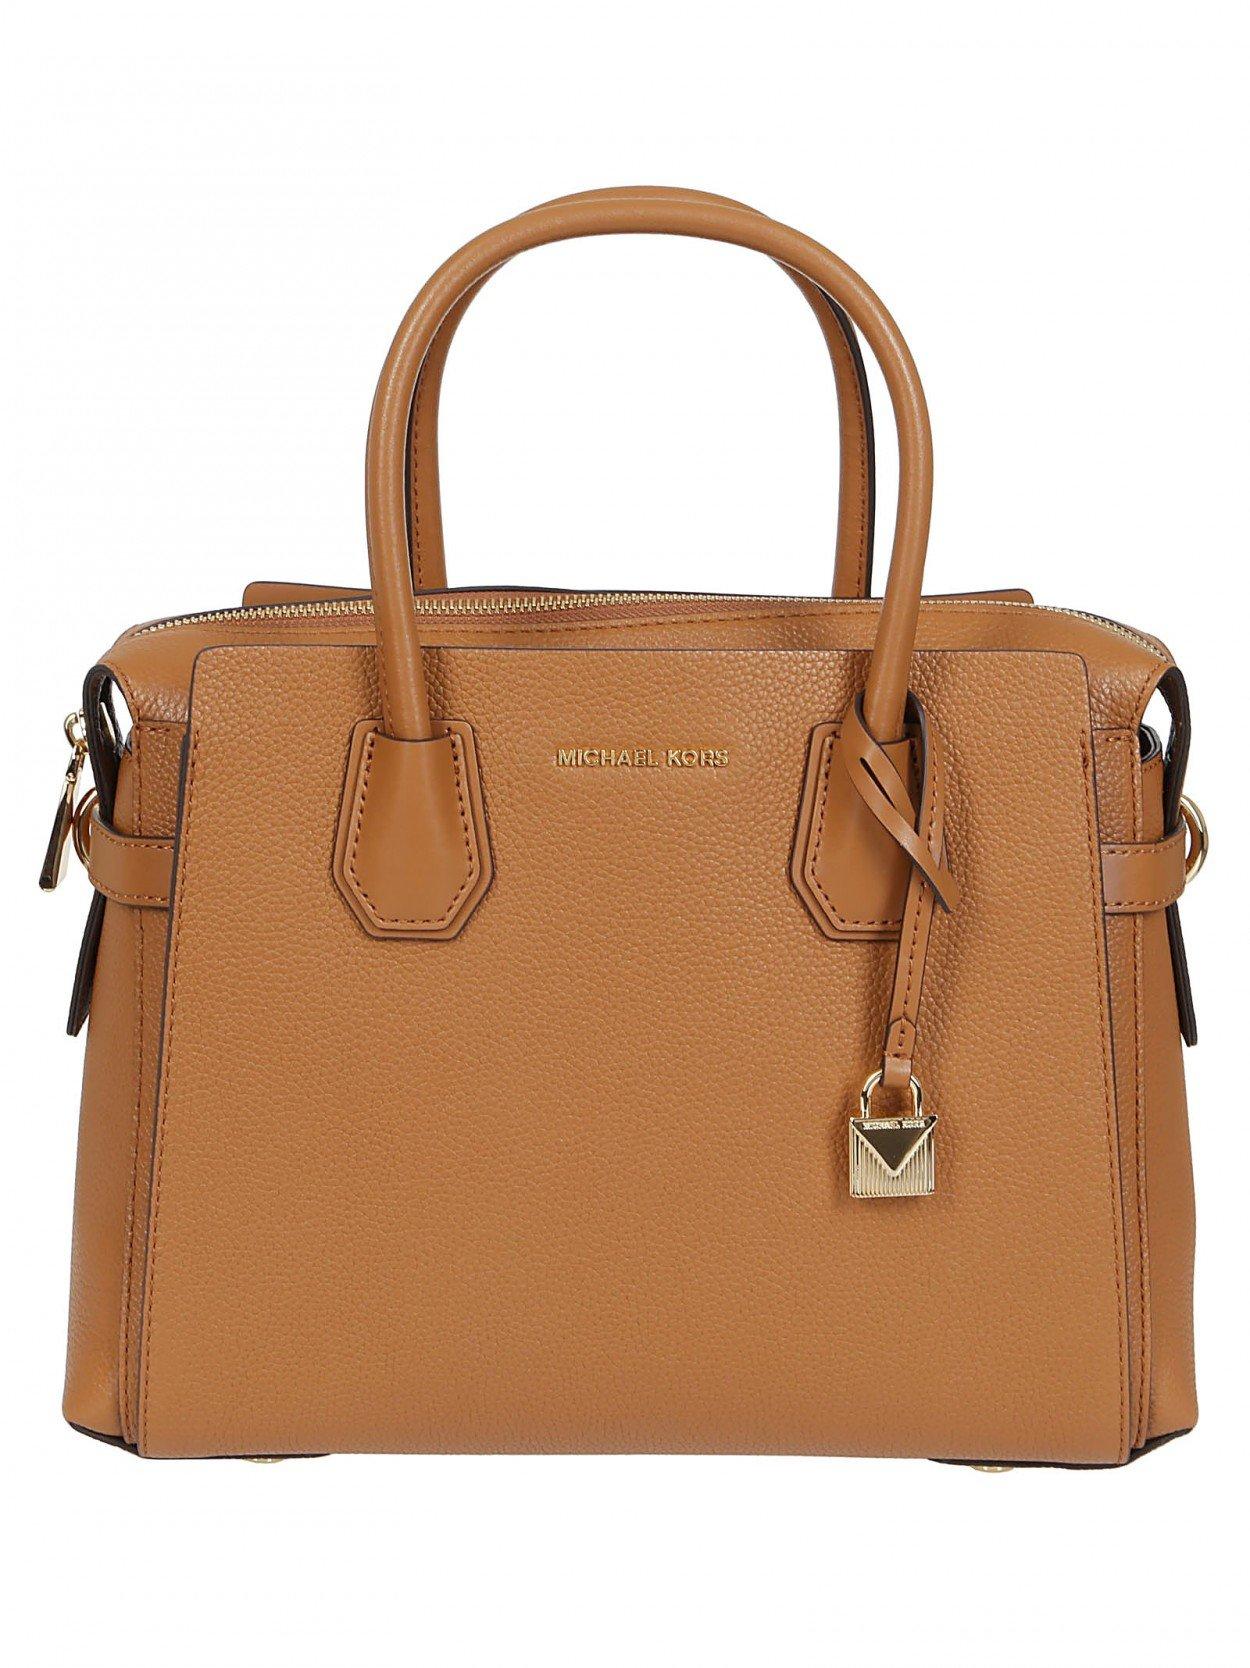 michael kors brown purse with lock